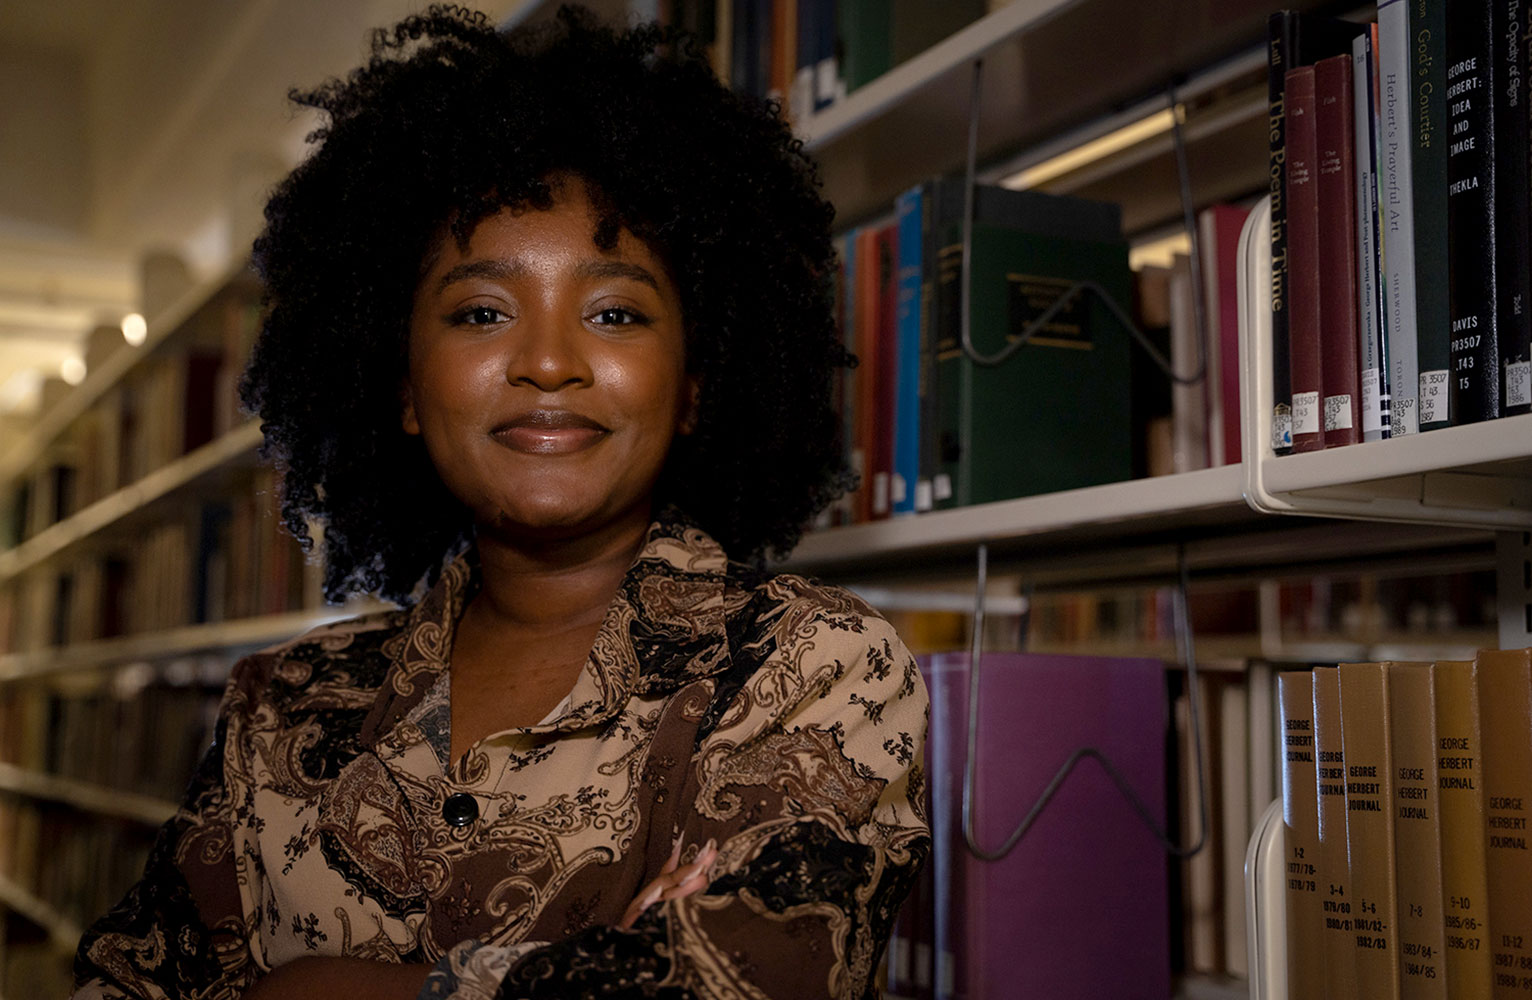 A portrait of Ayana Monroe in a library in front of books.